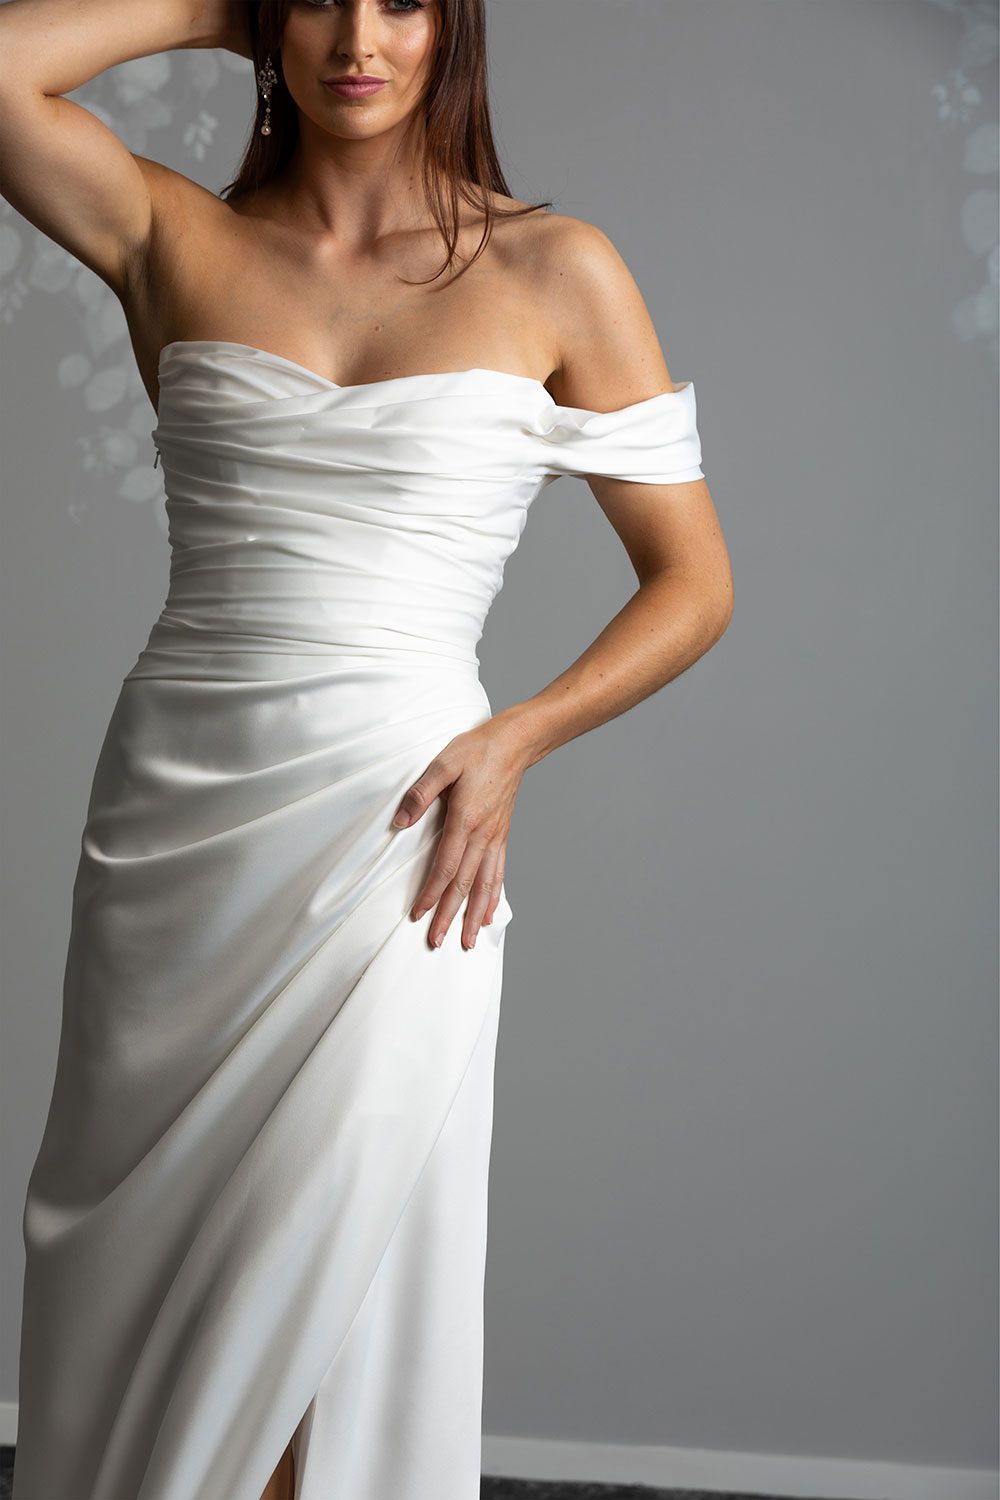 Christina Wedding Dress by Vinka Design - Featuring a sculptured, fitted bodice with a scoop neckline that flows seamlessly into a beautiful off shoulder detail. The draping from the bodice drops from the hips into a gentle fit and flare skirt, falling into an elegant train and features a concealed side split that reveals a subtle hint of leg. Close up of model showing off one shoulder detail and draped fitted bodice with scoop neckline